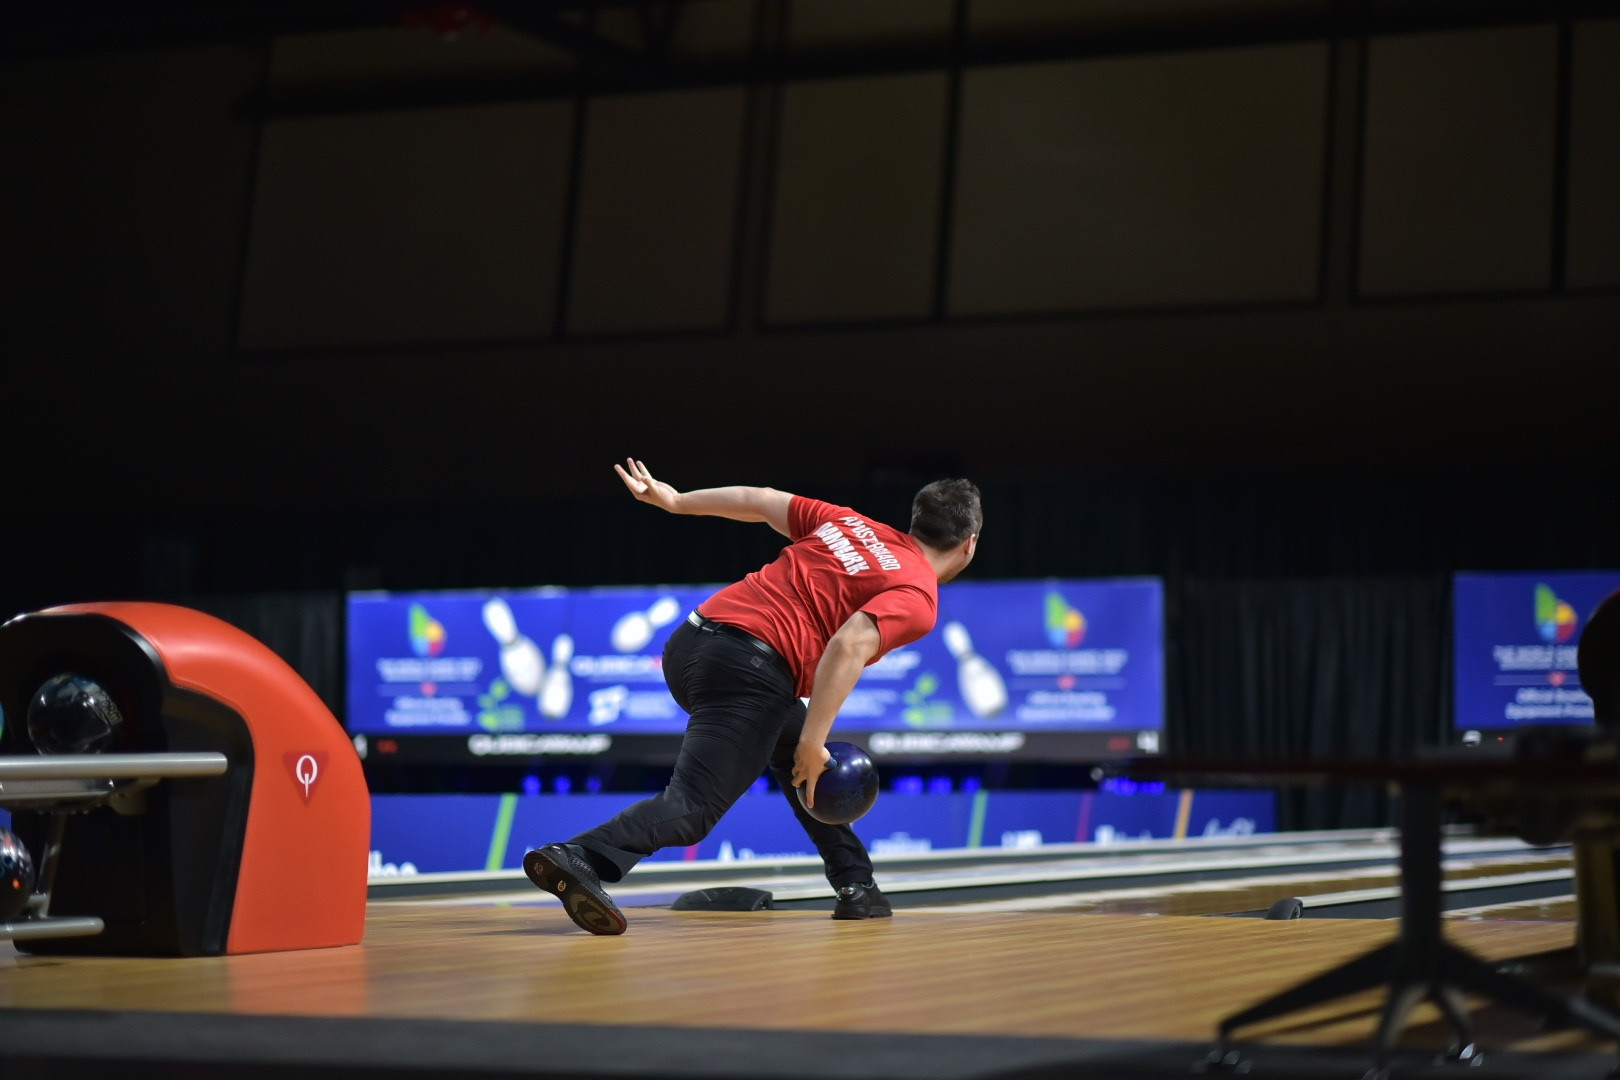 Denmark won both the men's and women's bowling doubles titles ©The World Games 2022